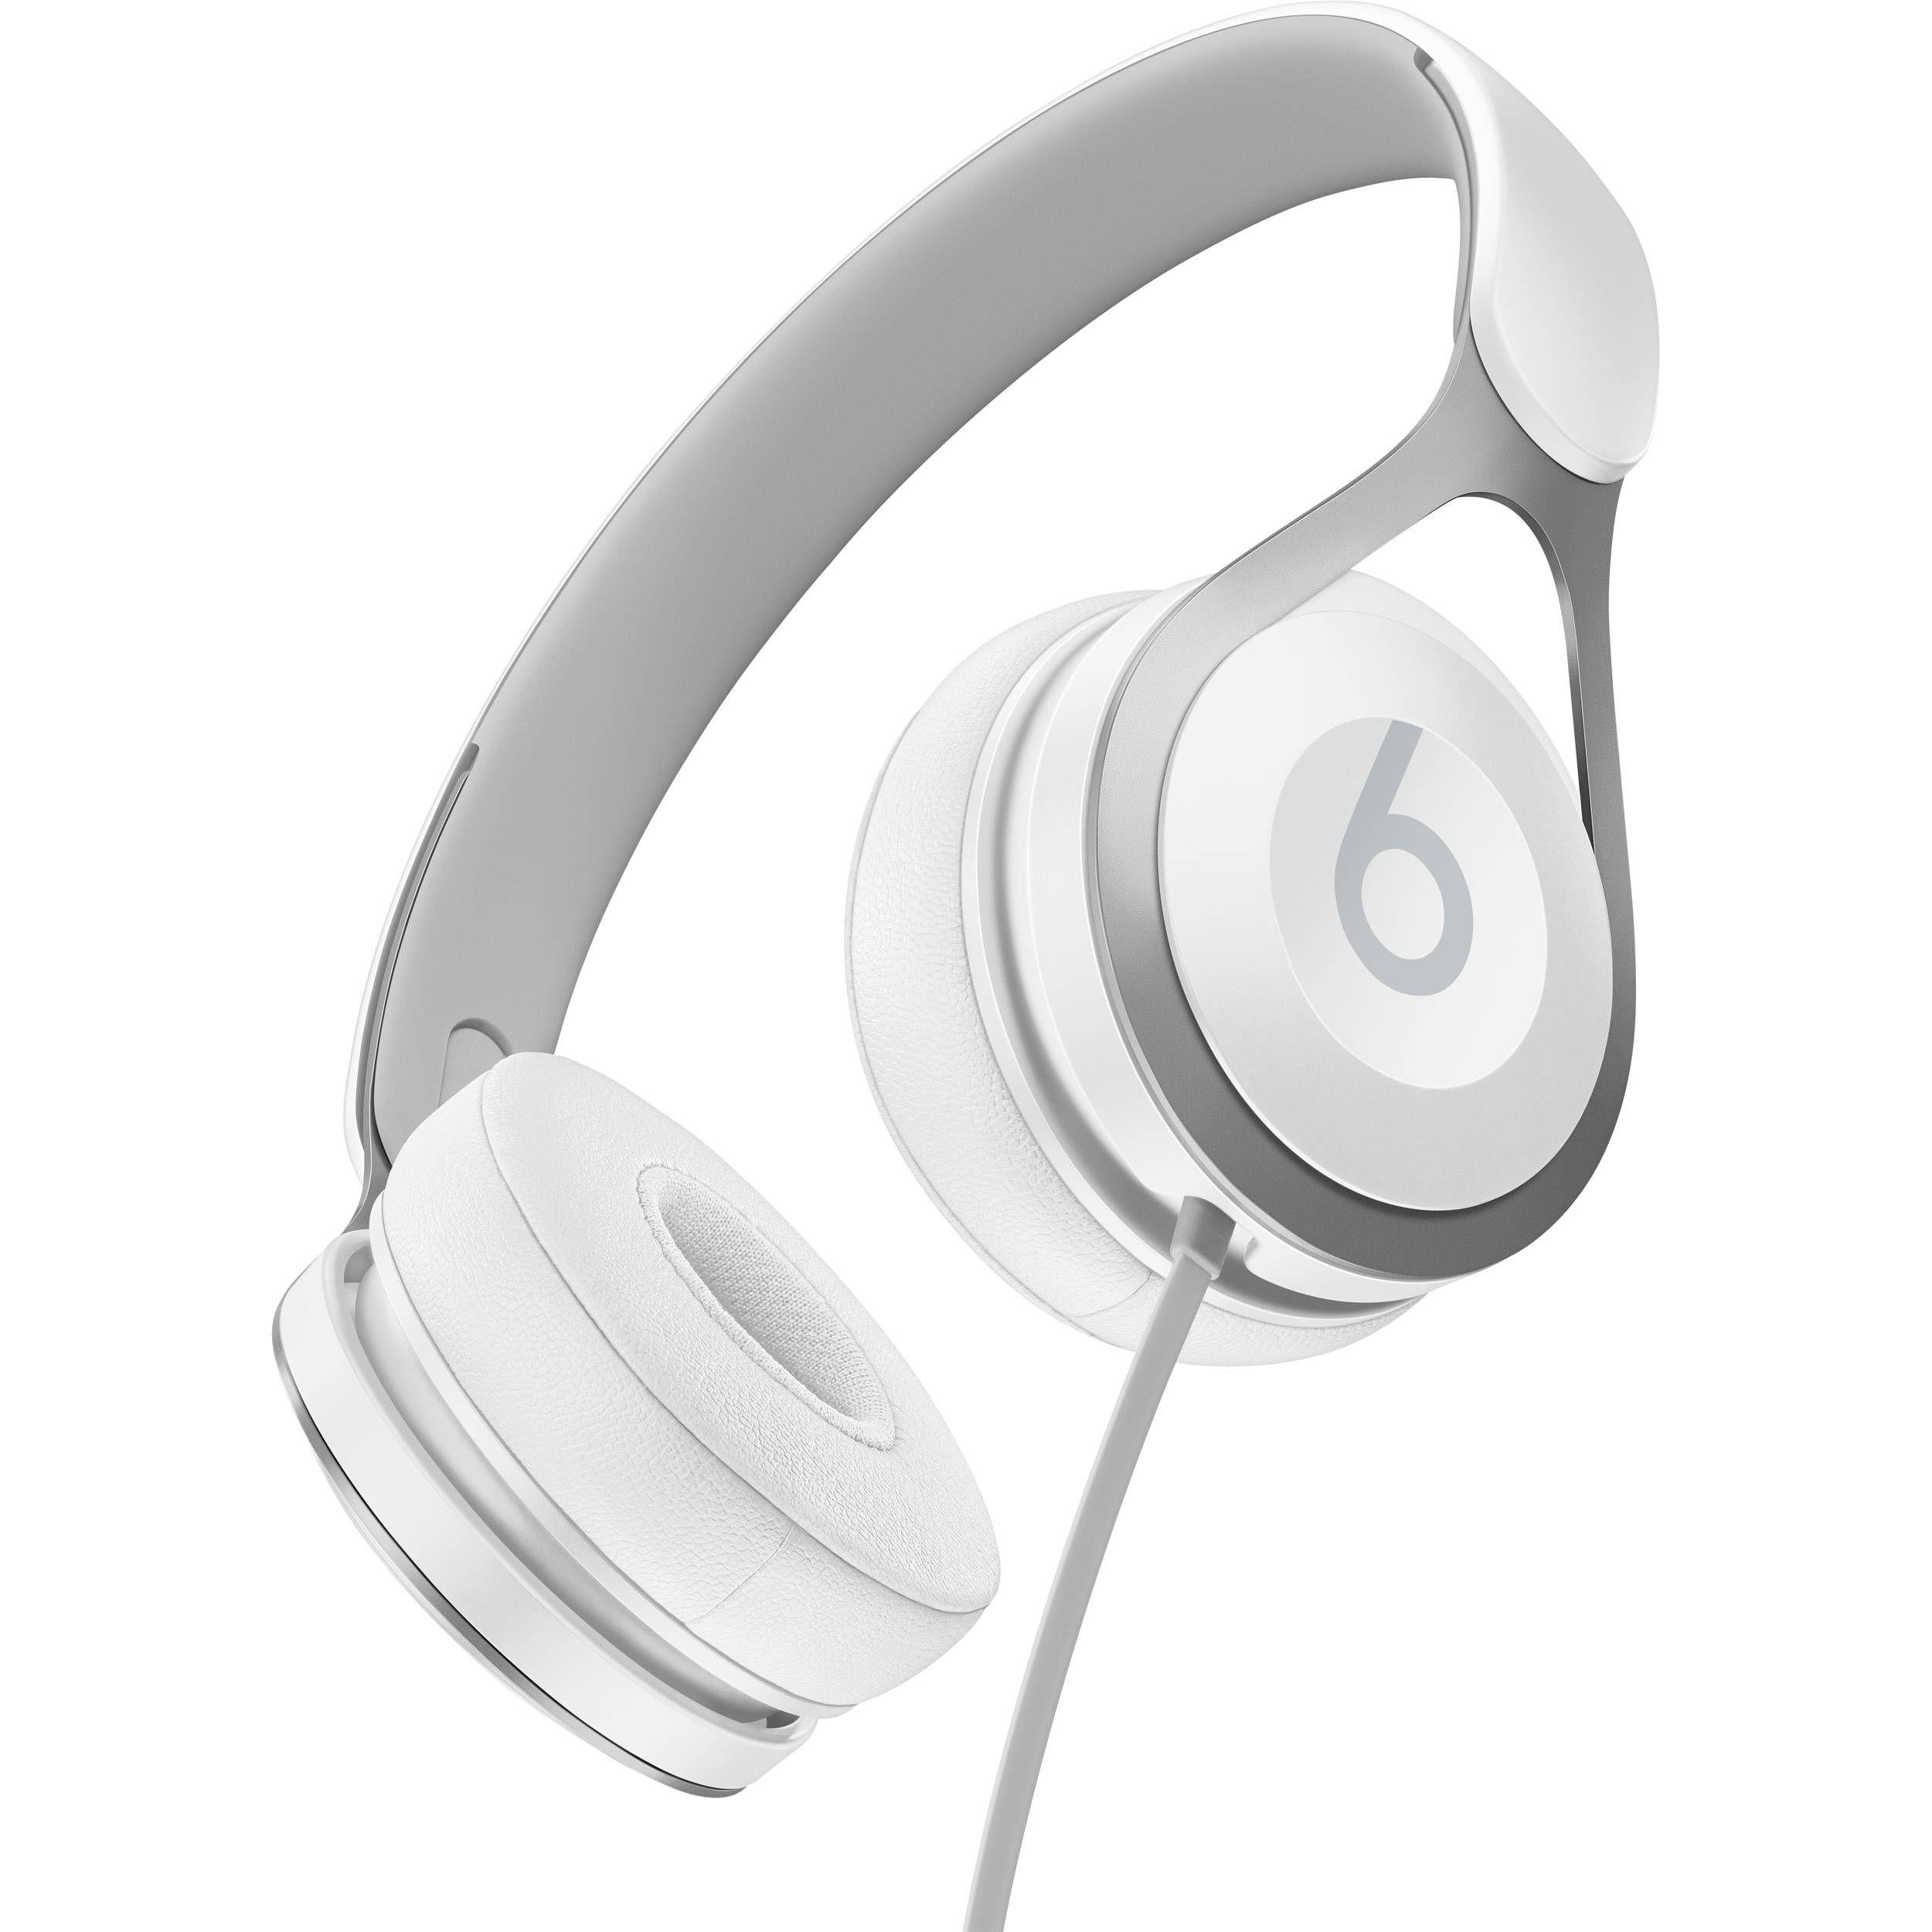 Black and White Beats Logo - Beats by Dr. Dre Beats EP On-Ear Headphones (White) ML9A2LL/A